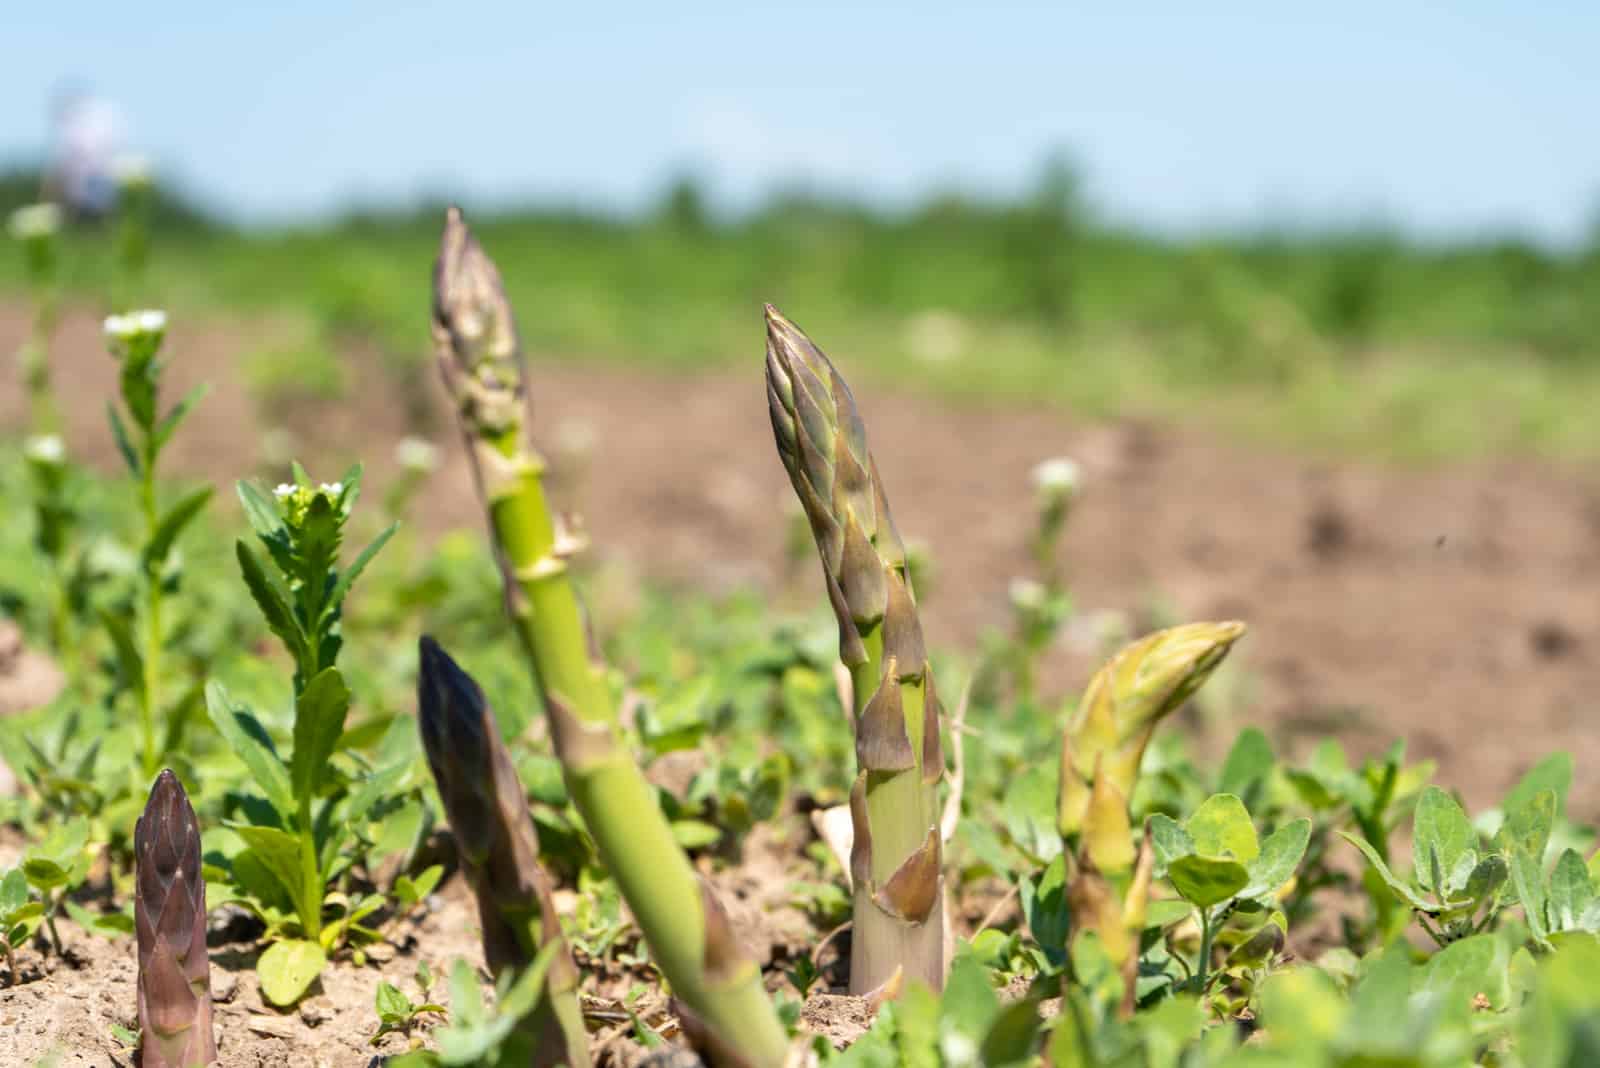 Sprouts of asparagus in the field